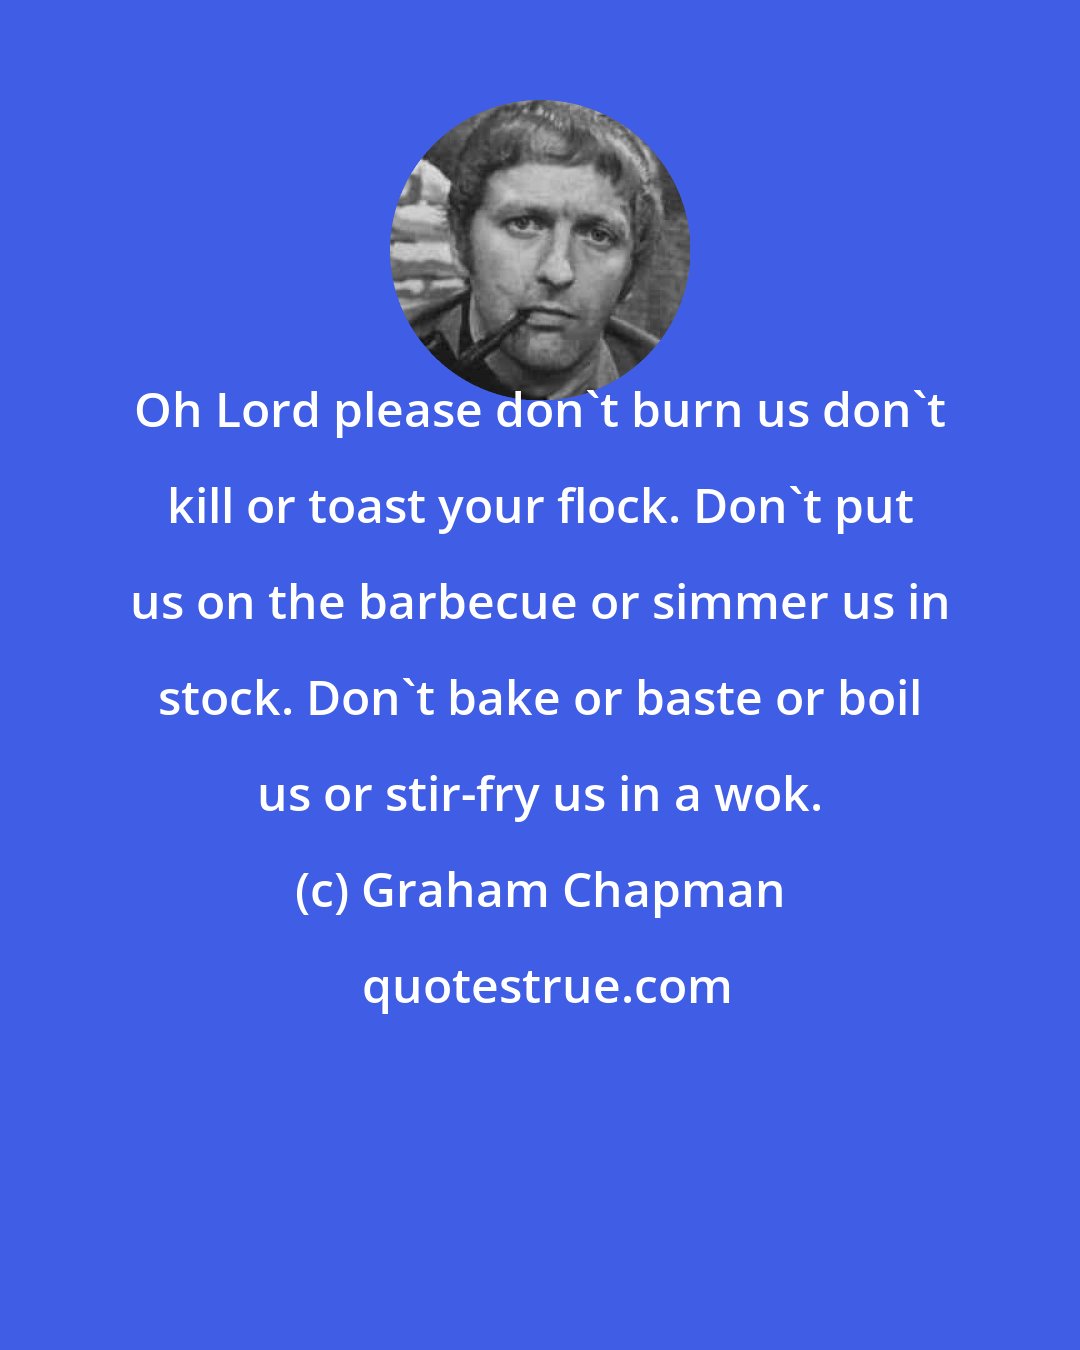 Graham Chapman: Oh Lord please don't burn us don't kill or toast your flock. Don't put us on the barbecue or simmer us in stock. Don't bake or baste or boil us or stir-fry us in a wok.